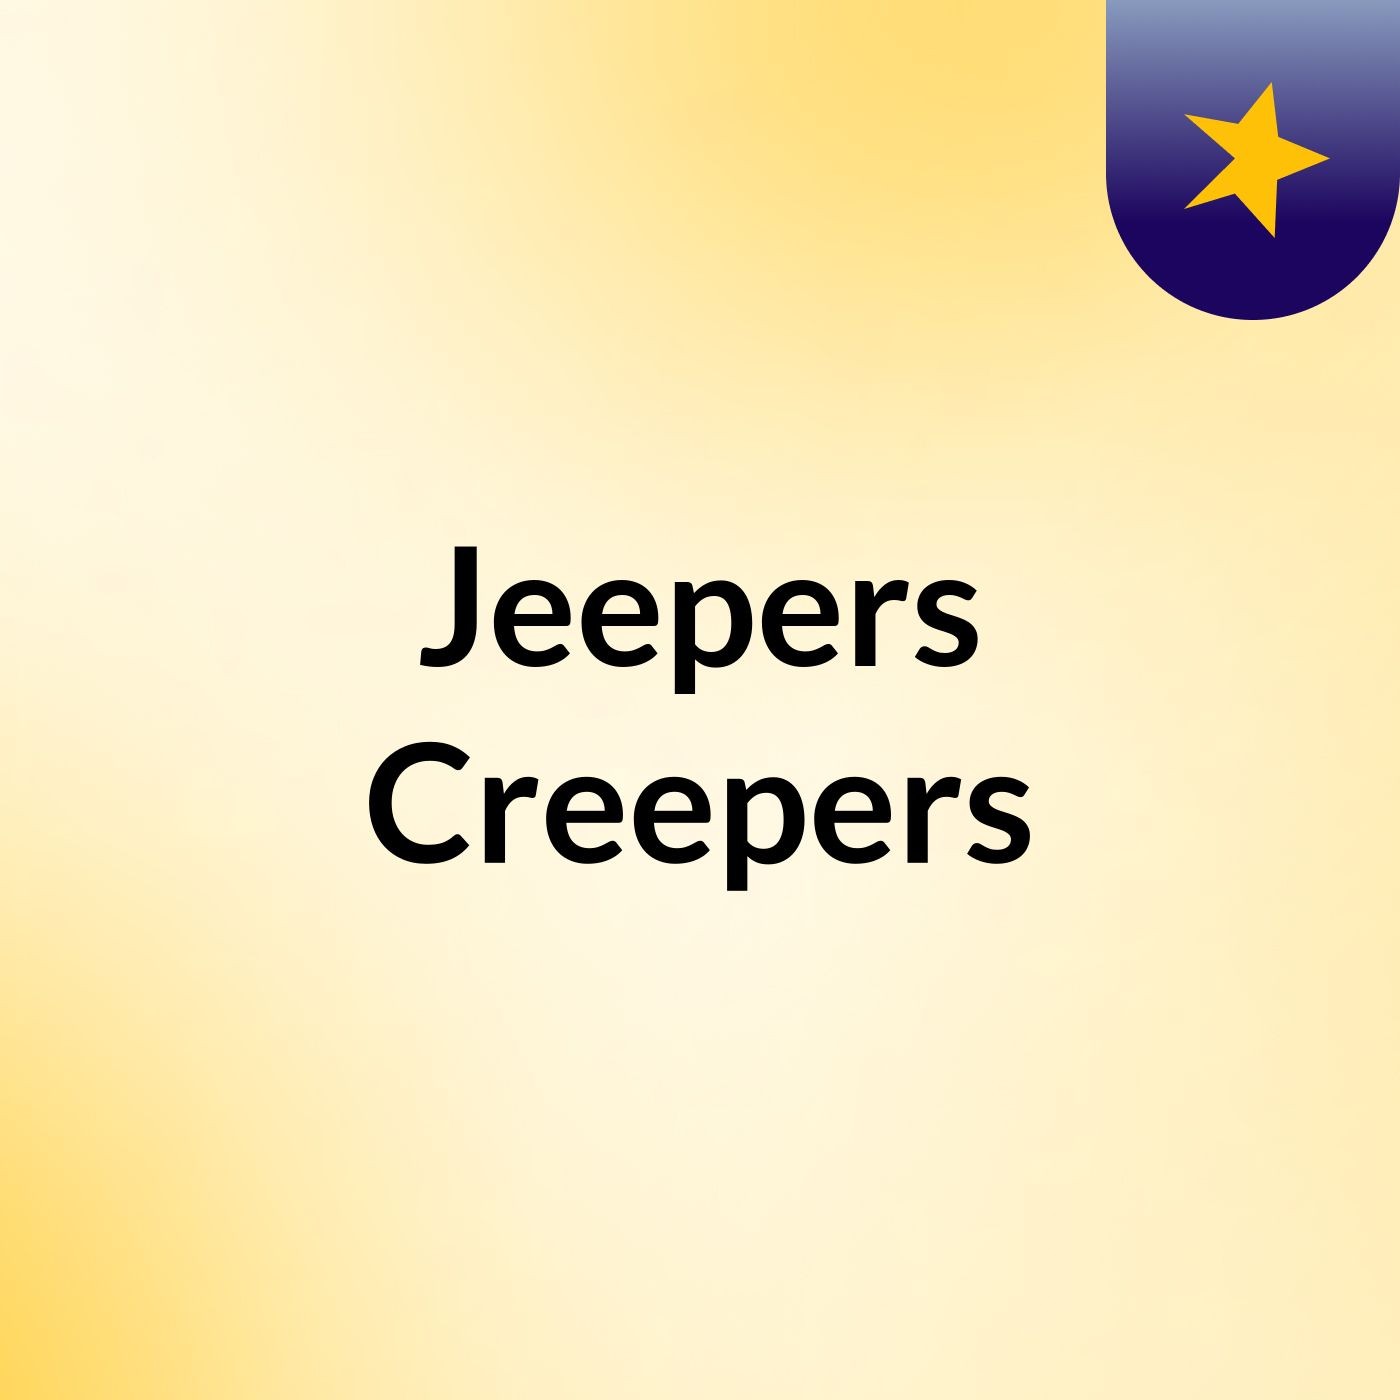 Episode 2 - Jeepers Creepers